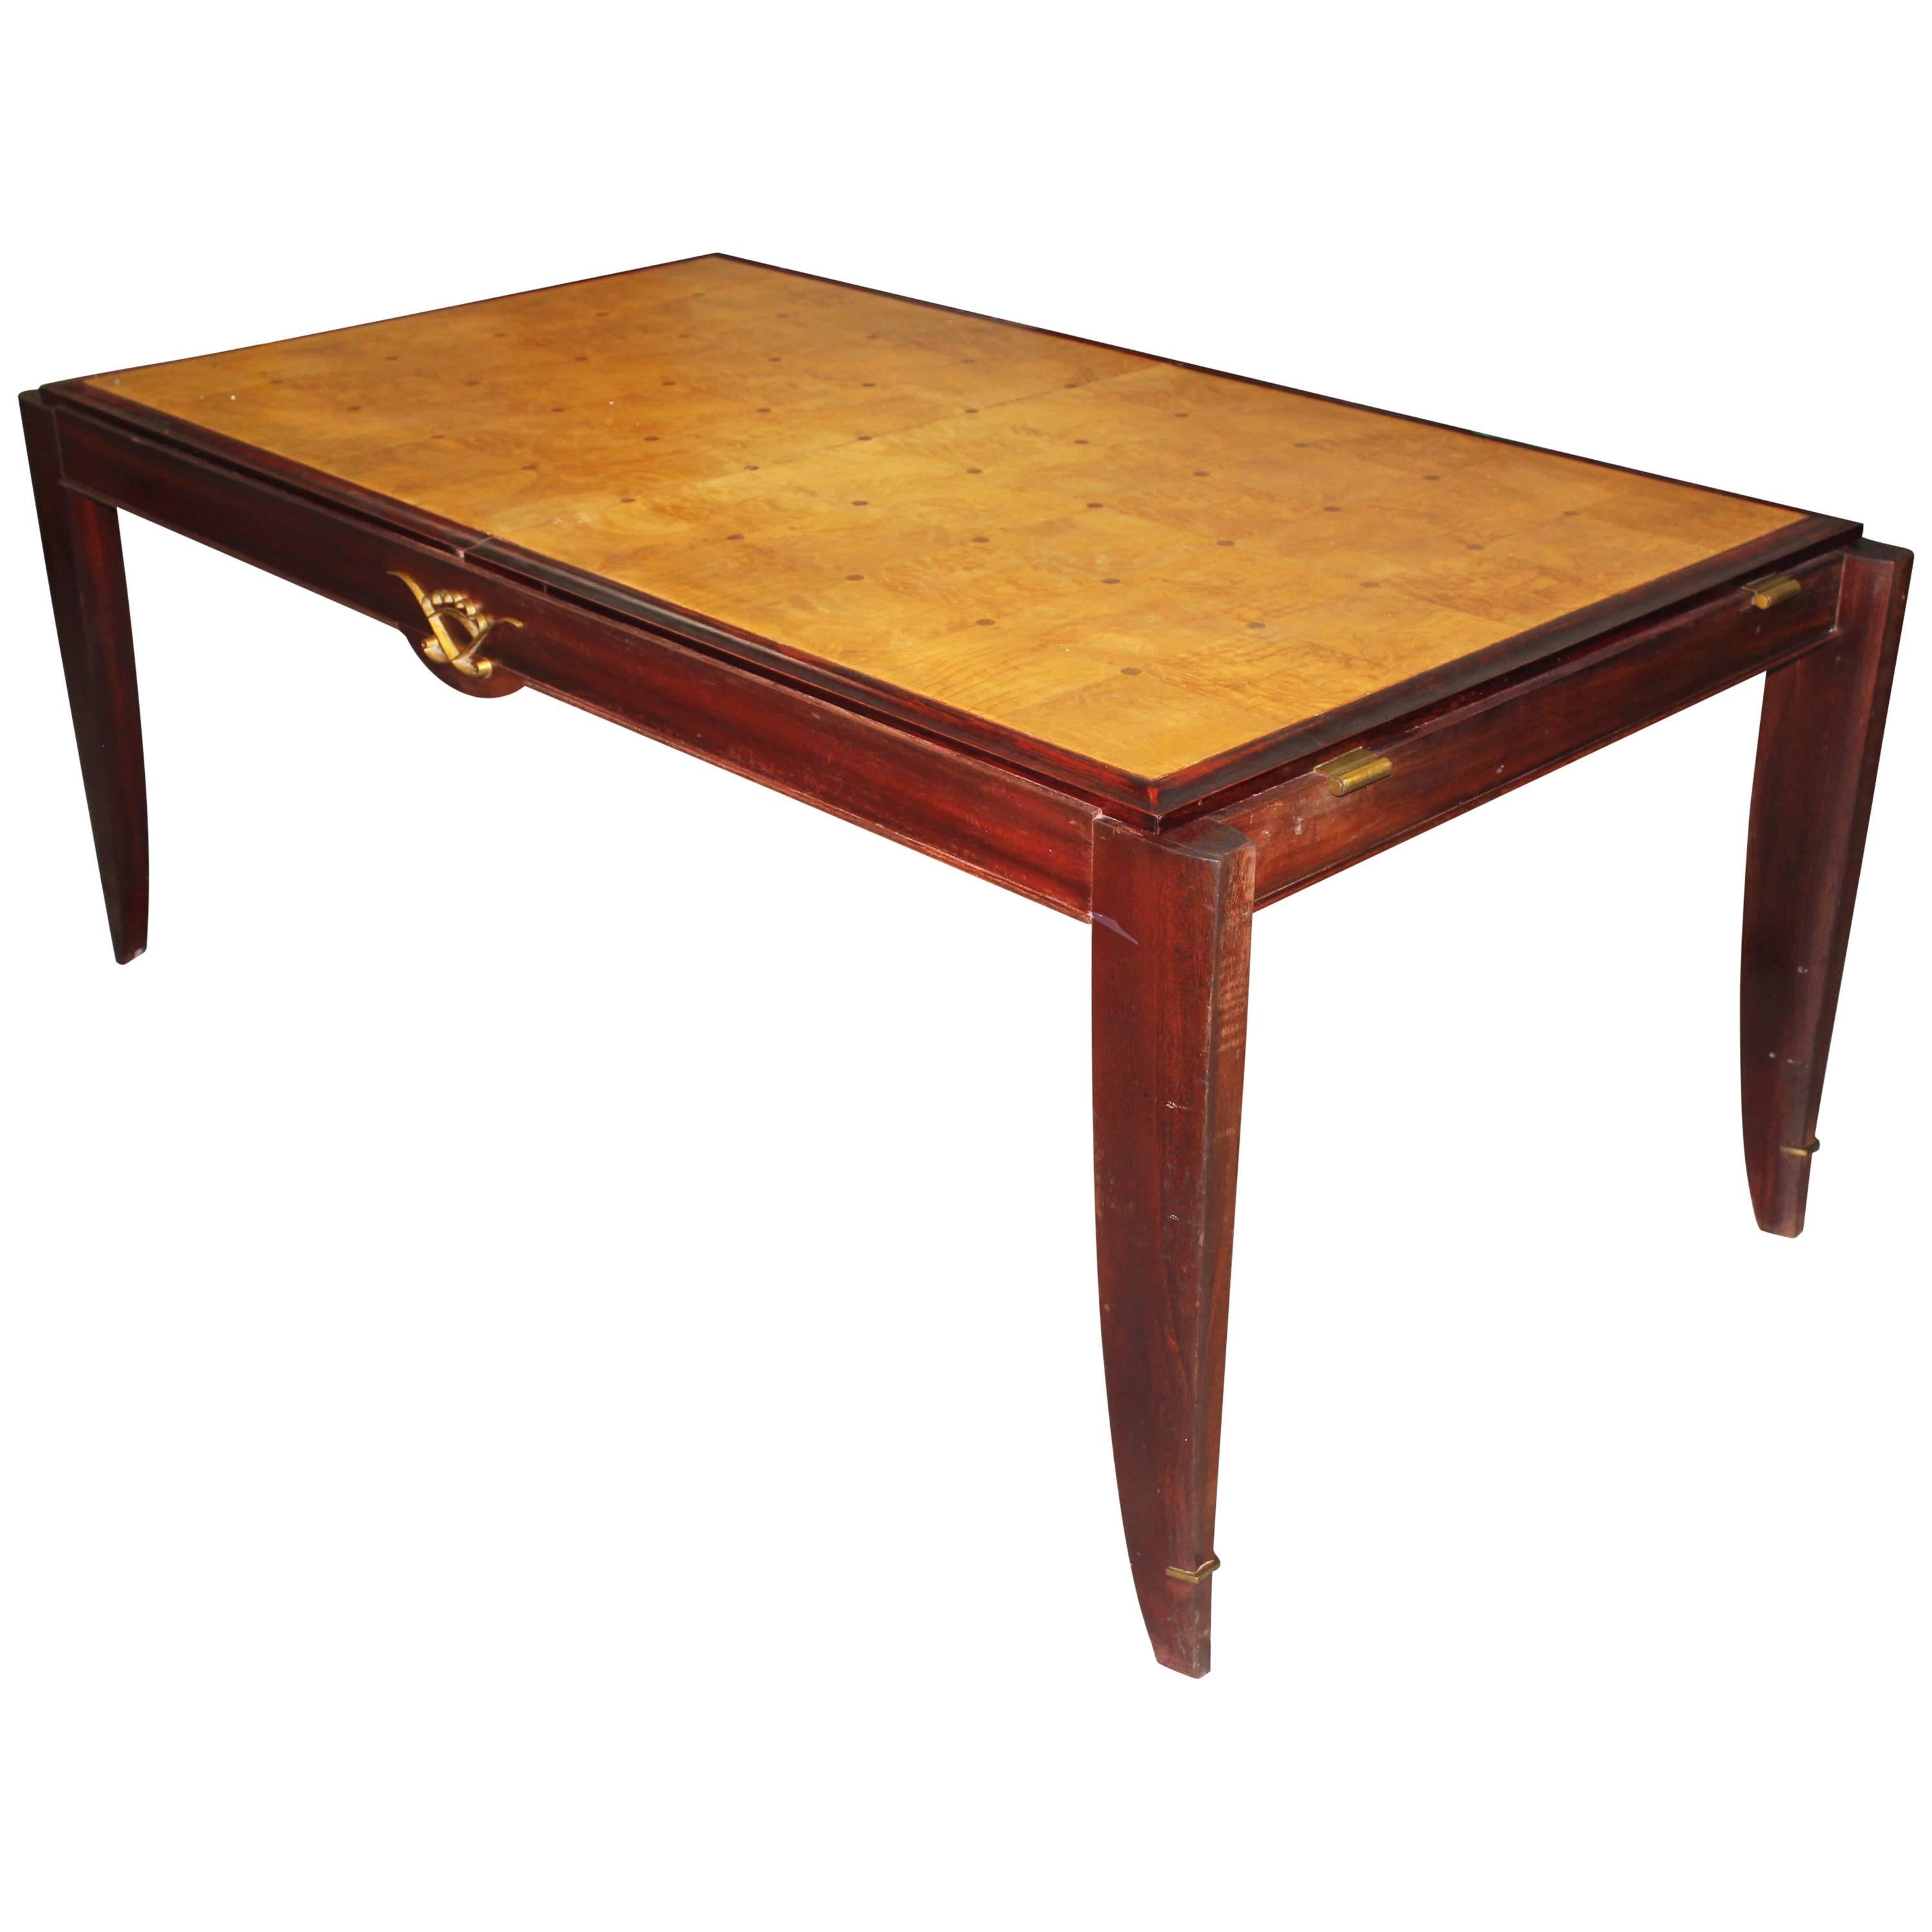 French Art Deco Sycamore with Mahogany Dining Table, circa 1940s